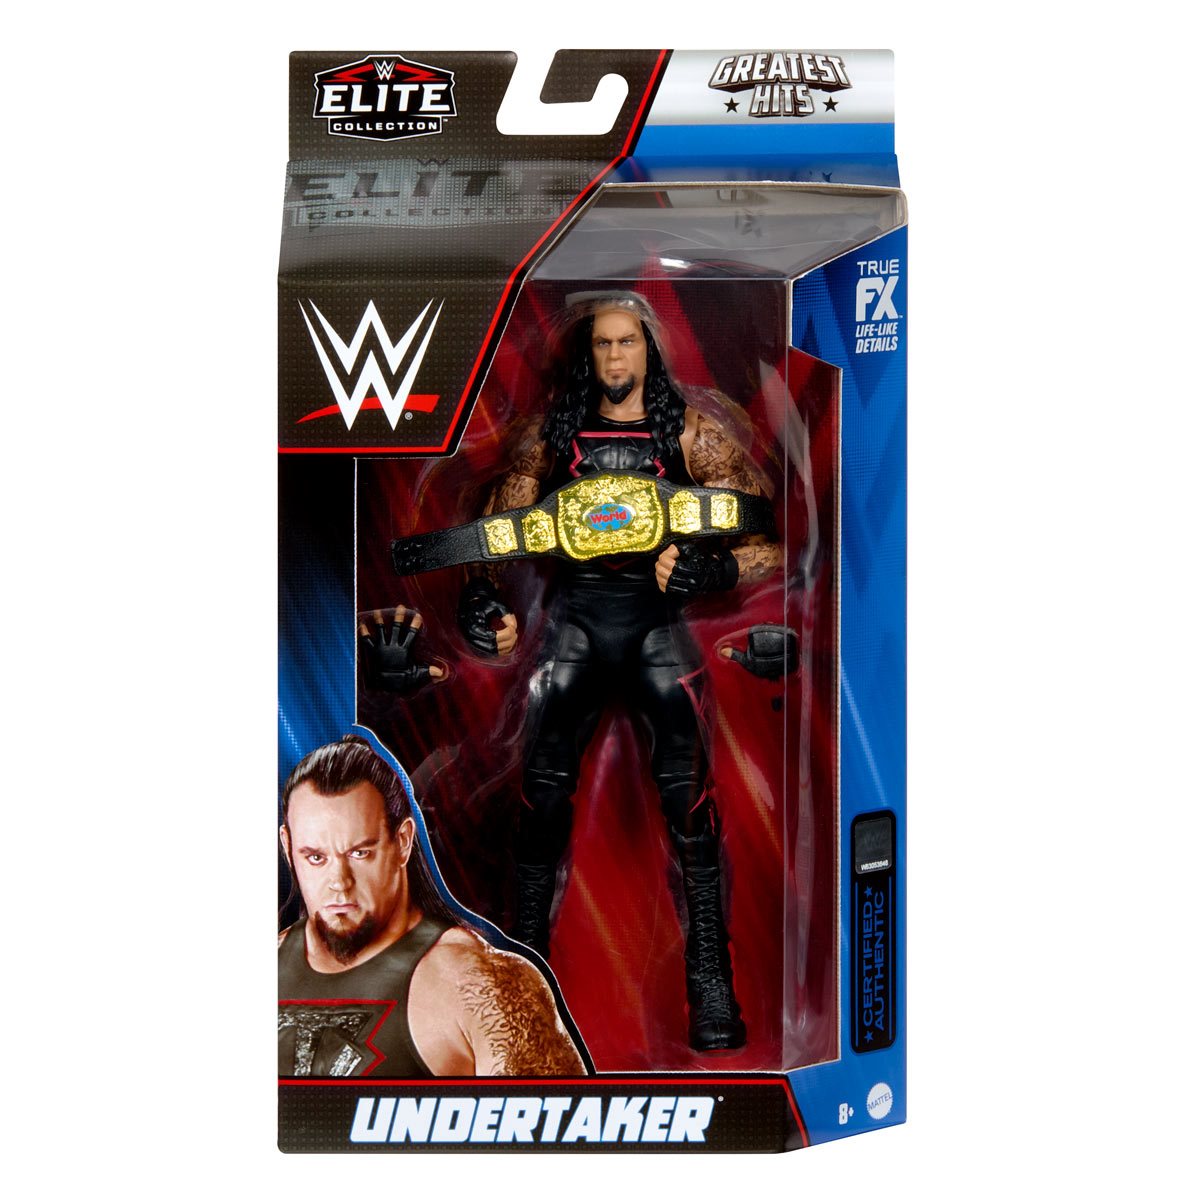 WWE Elite Collection Greatest Hits Undertaker